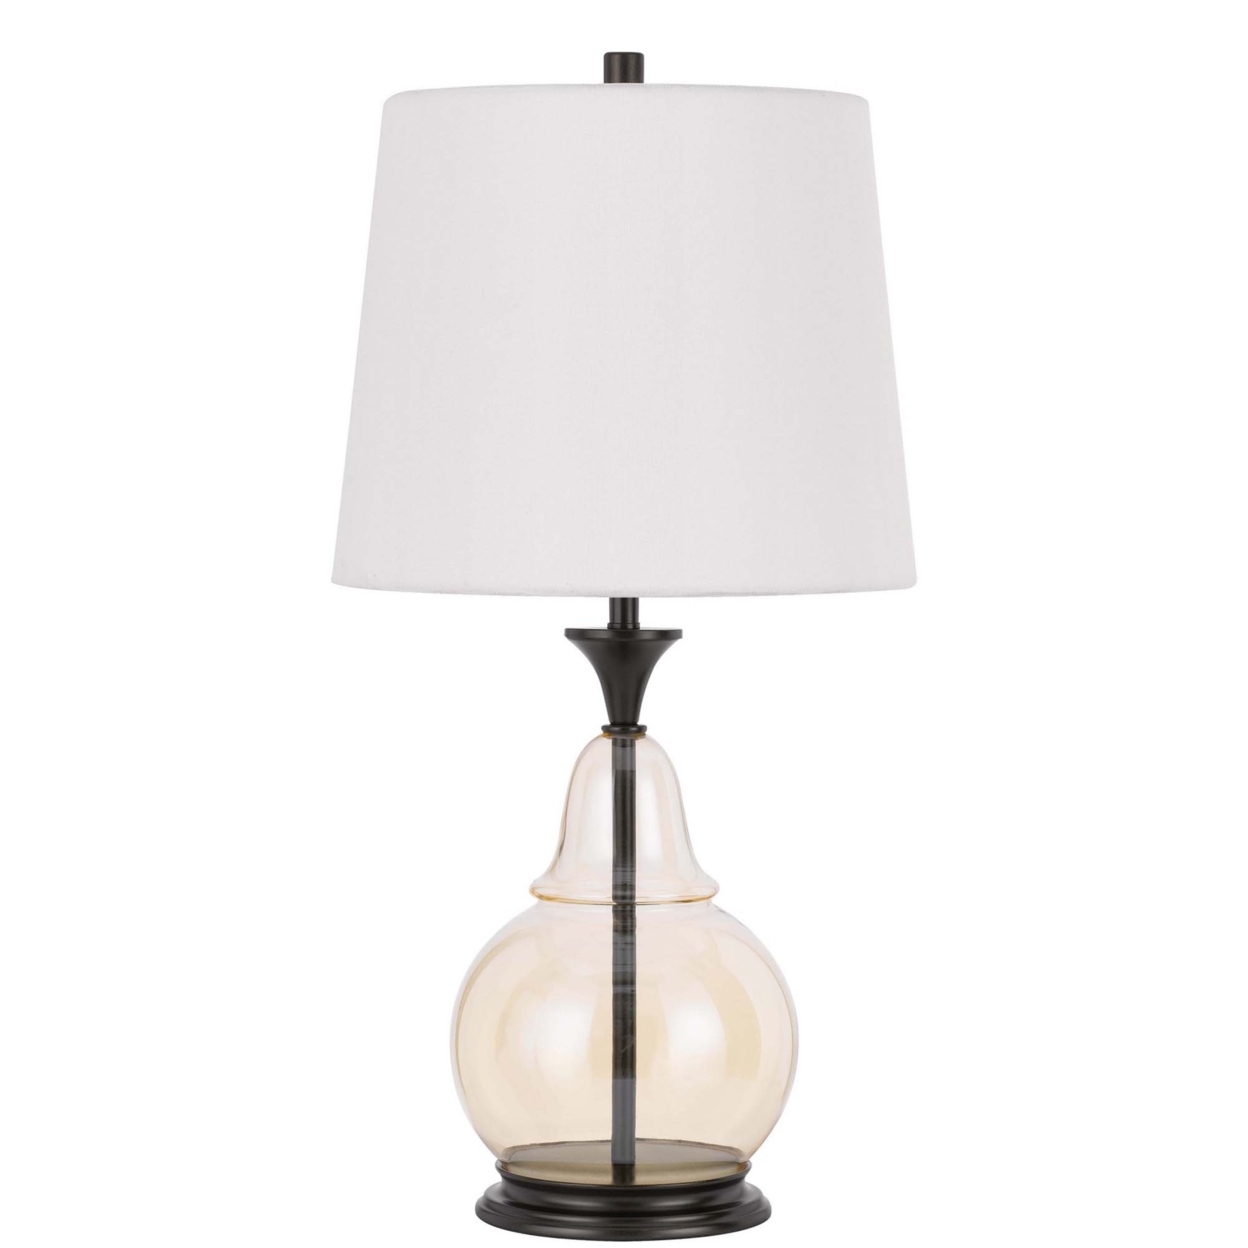 Table Lamp With Metal And Glass Jar Base, White And Bronze- Saltoro Sherpi